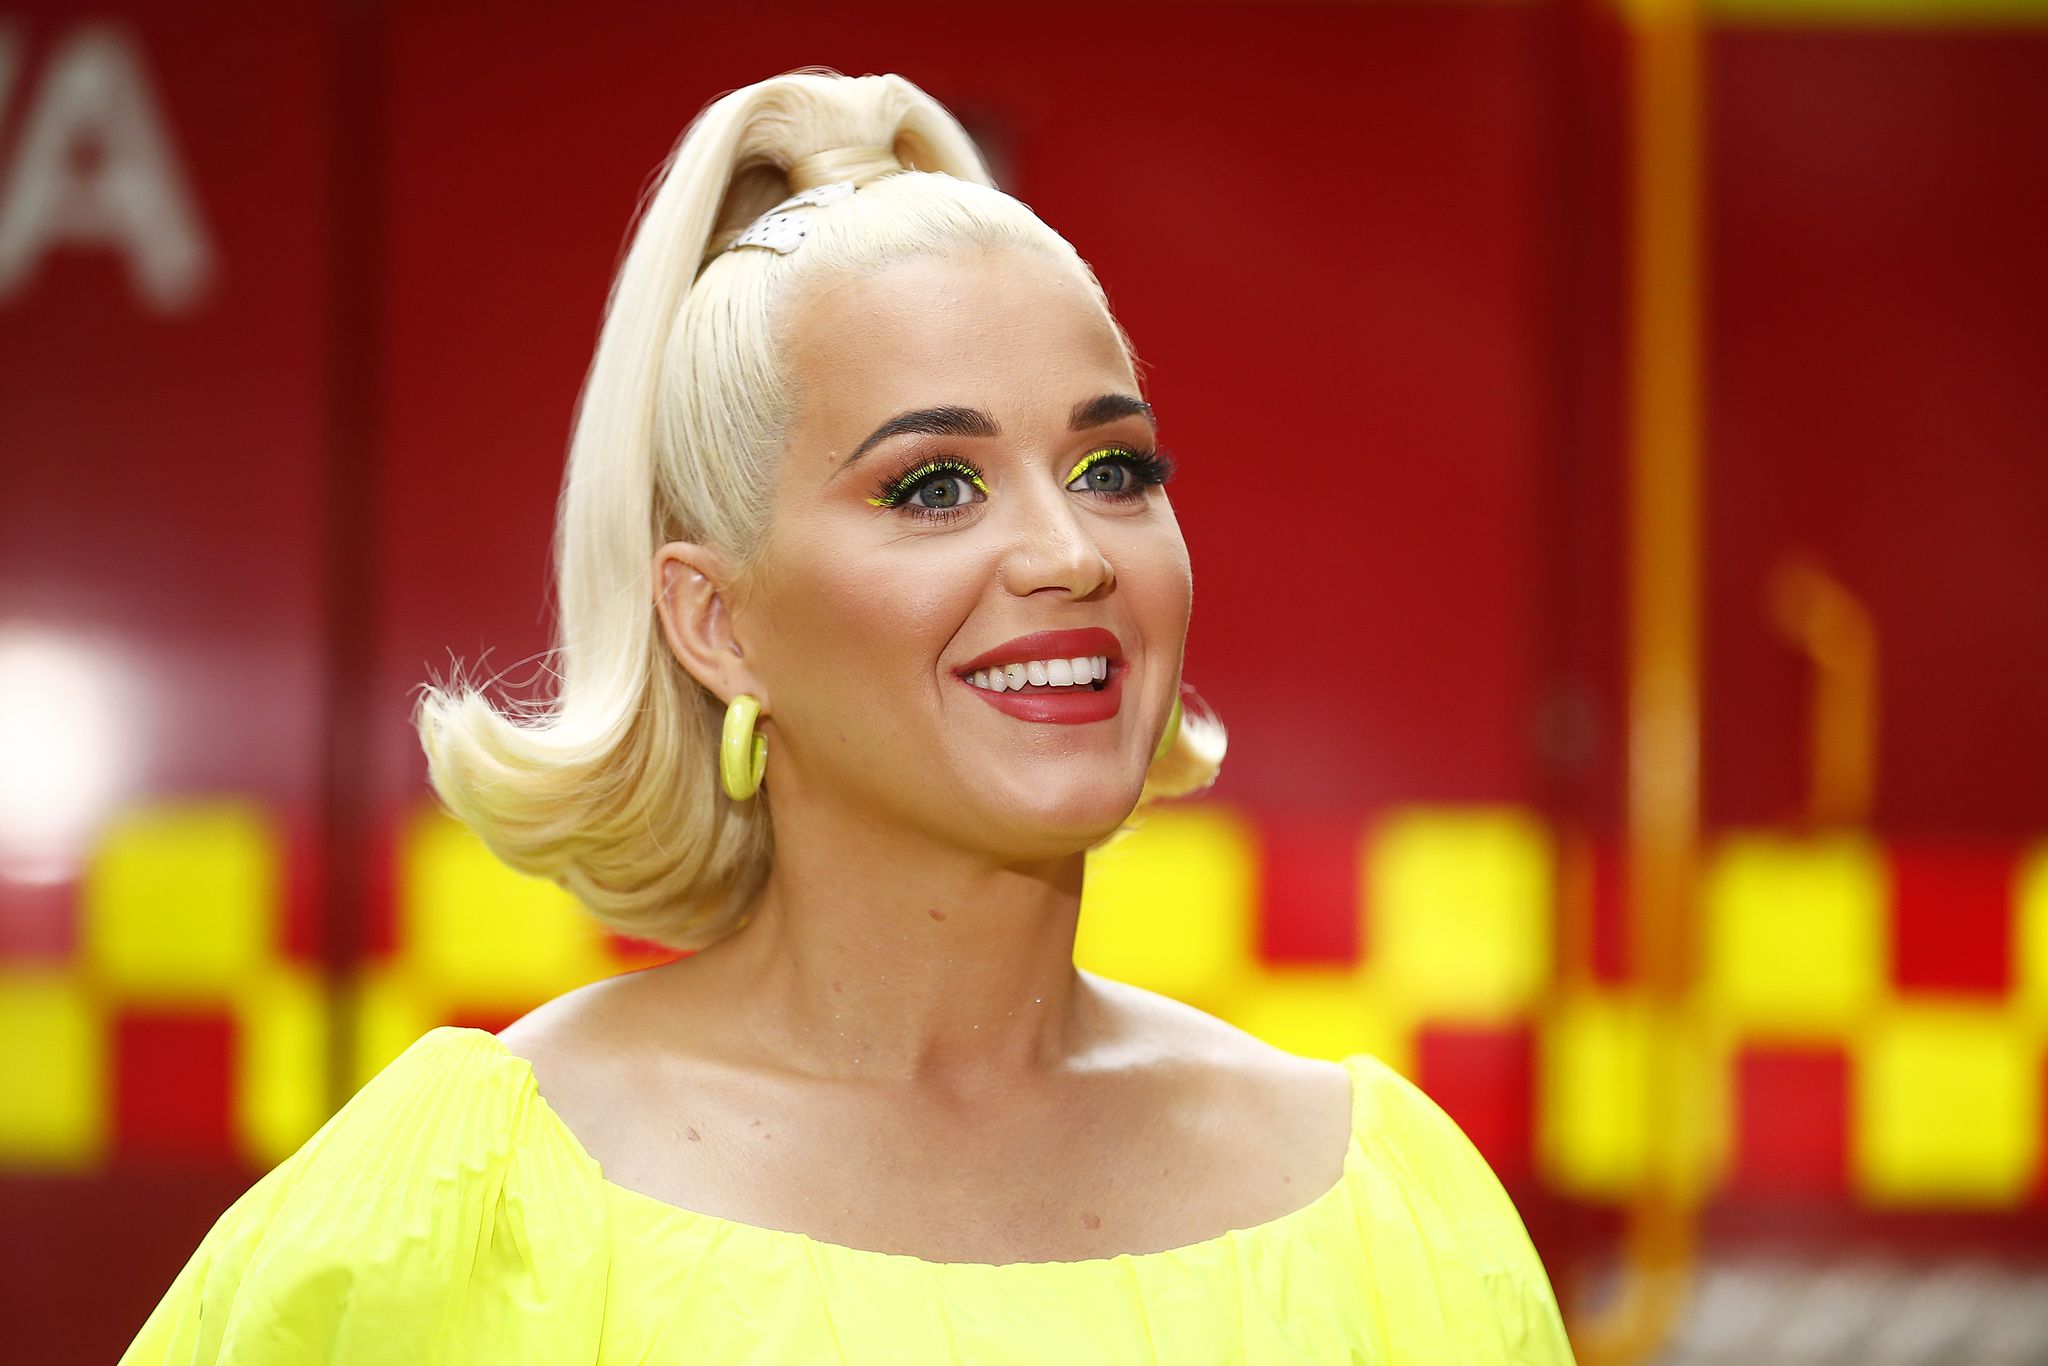 https://hips.hearstapps.com/hmg-prod/images/katy-perry-speaks-to-media-on-march-11-2020-in-bright-news-photo-1607956859.?crop=1.00xw:1.00xh;0,0&resize=2048:*